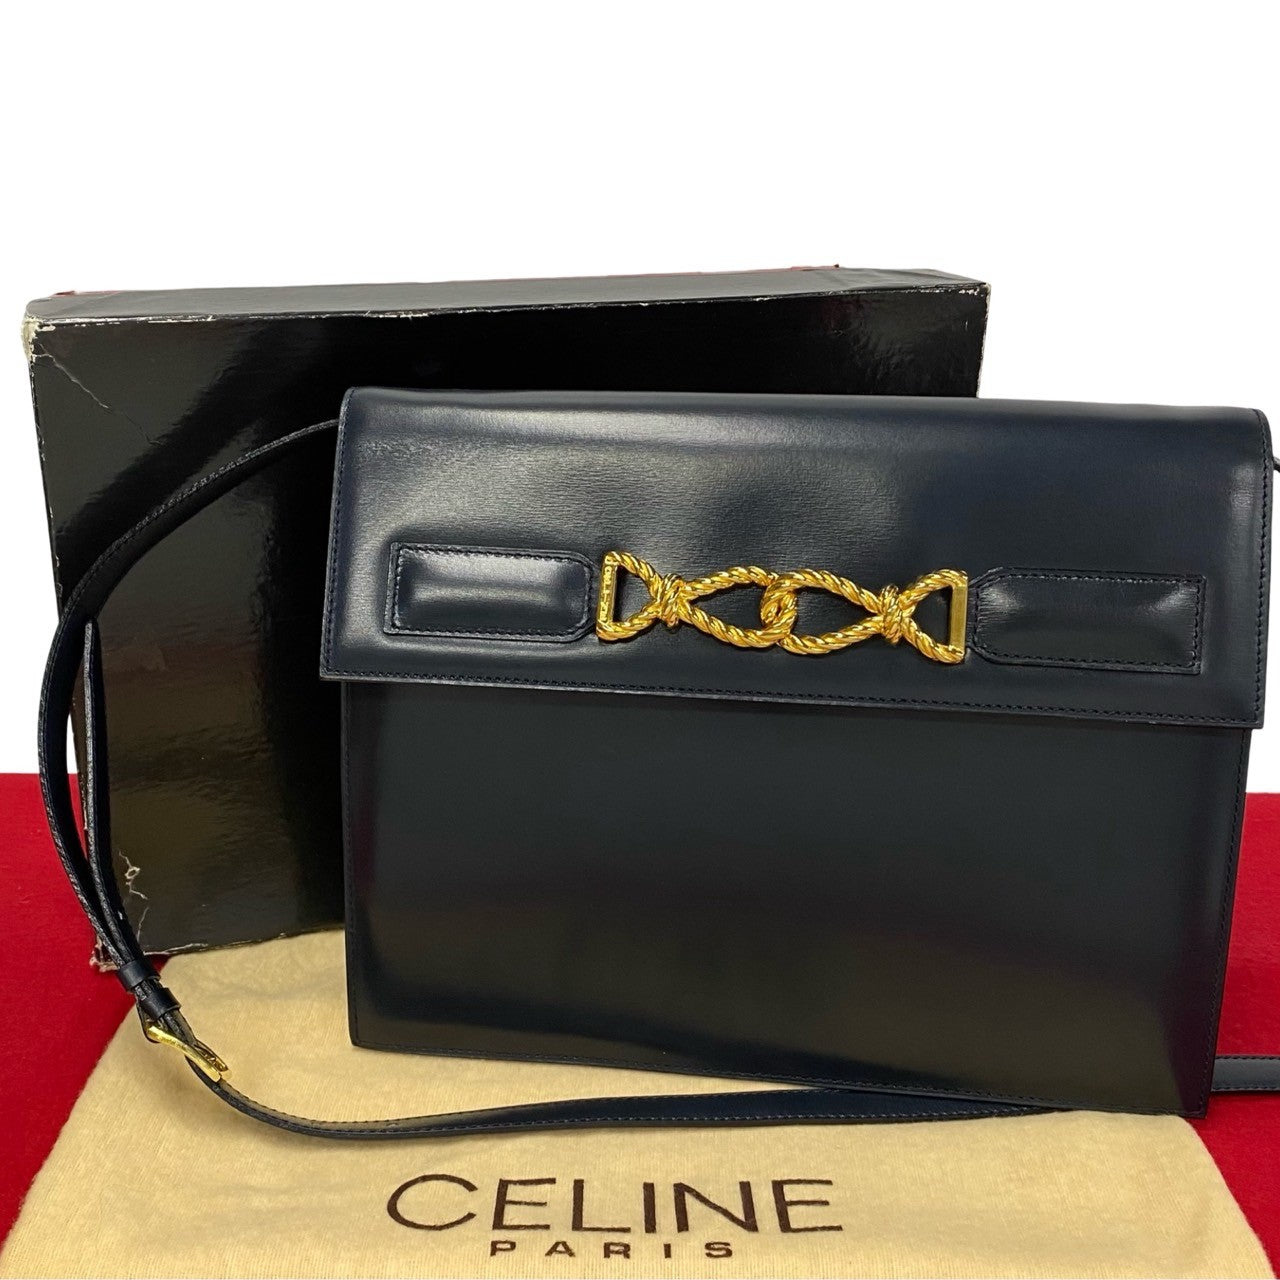 Celine Leather Crossbody Bag Leather Crossbody Bag in Excellent condition